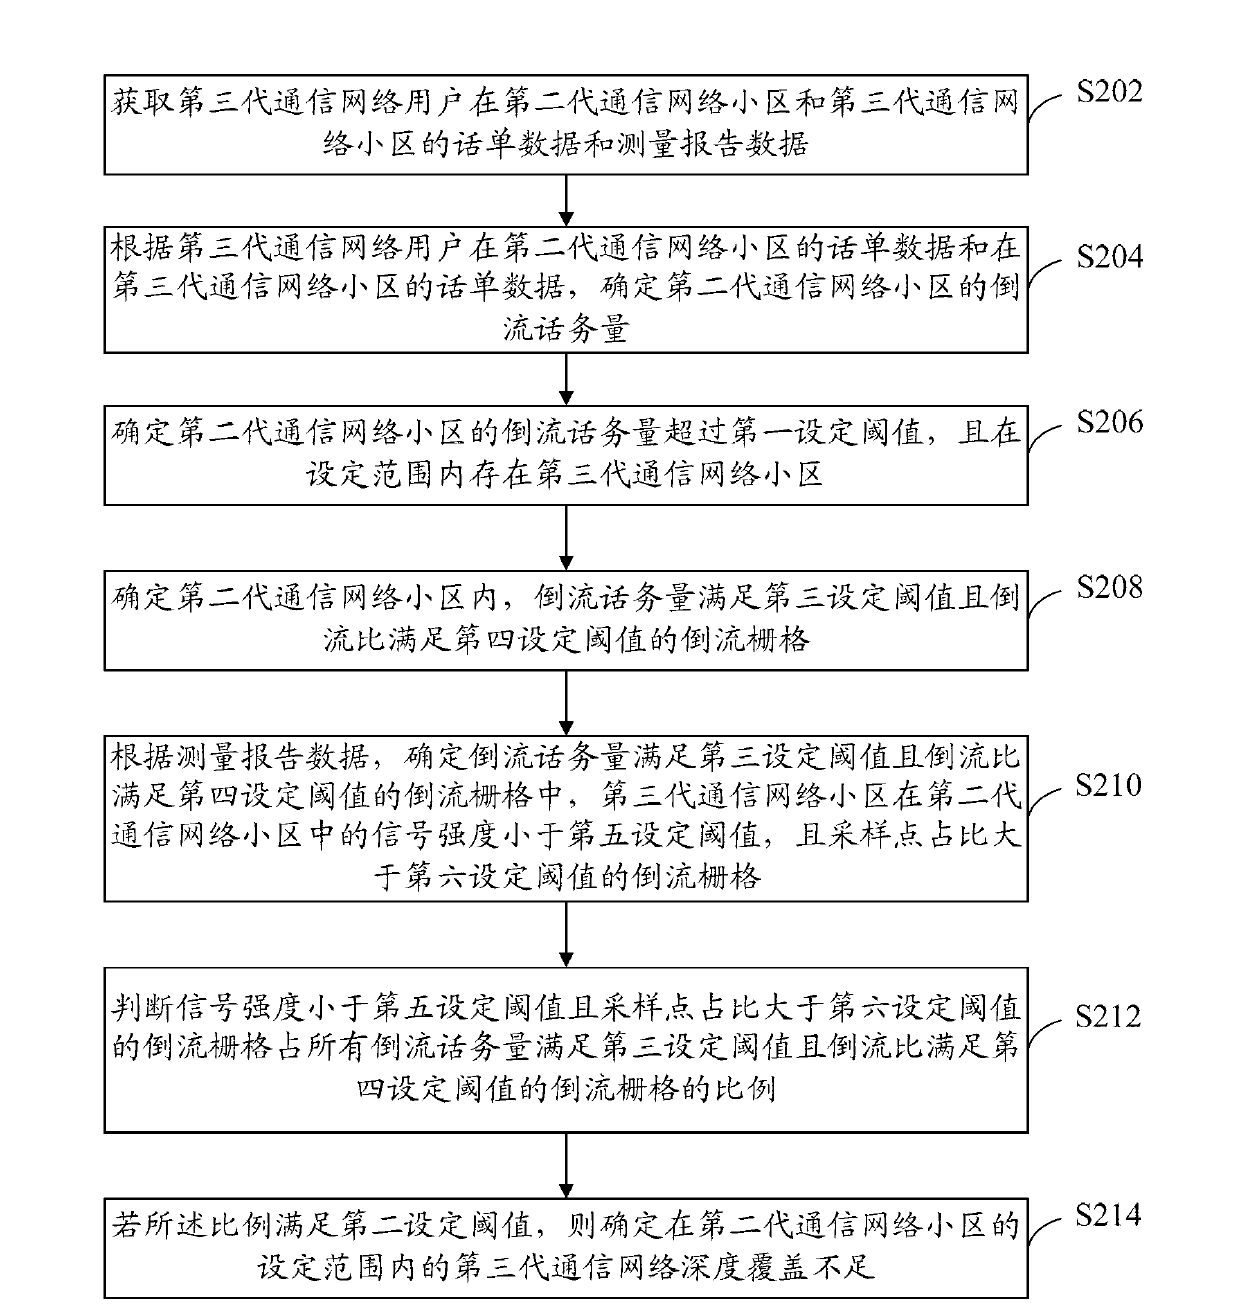 Network coverage evaluation method and device